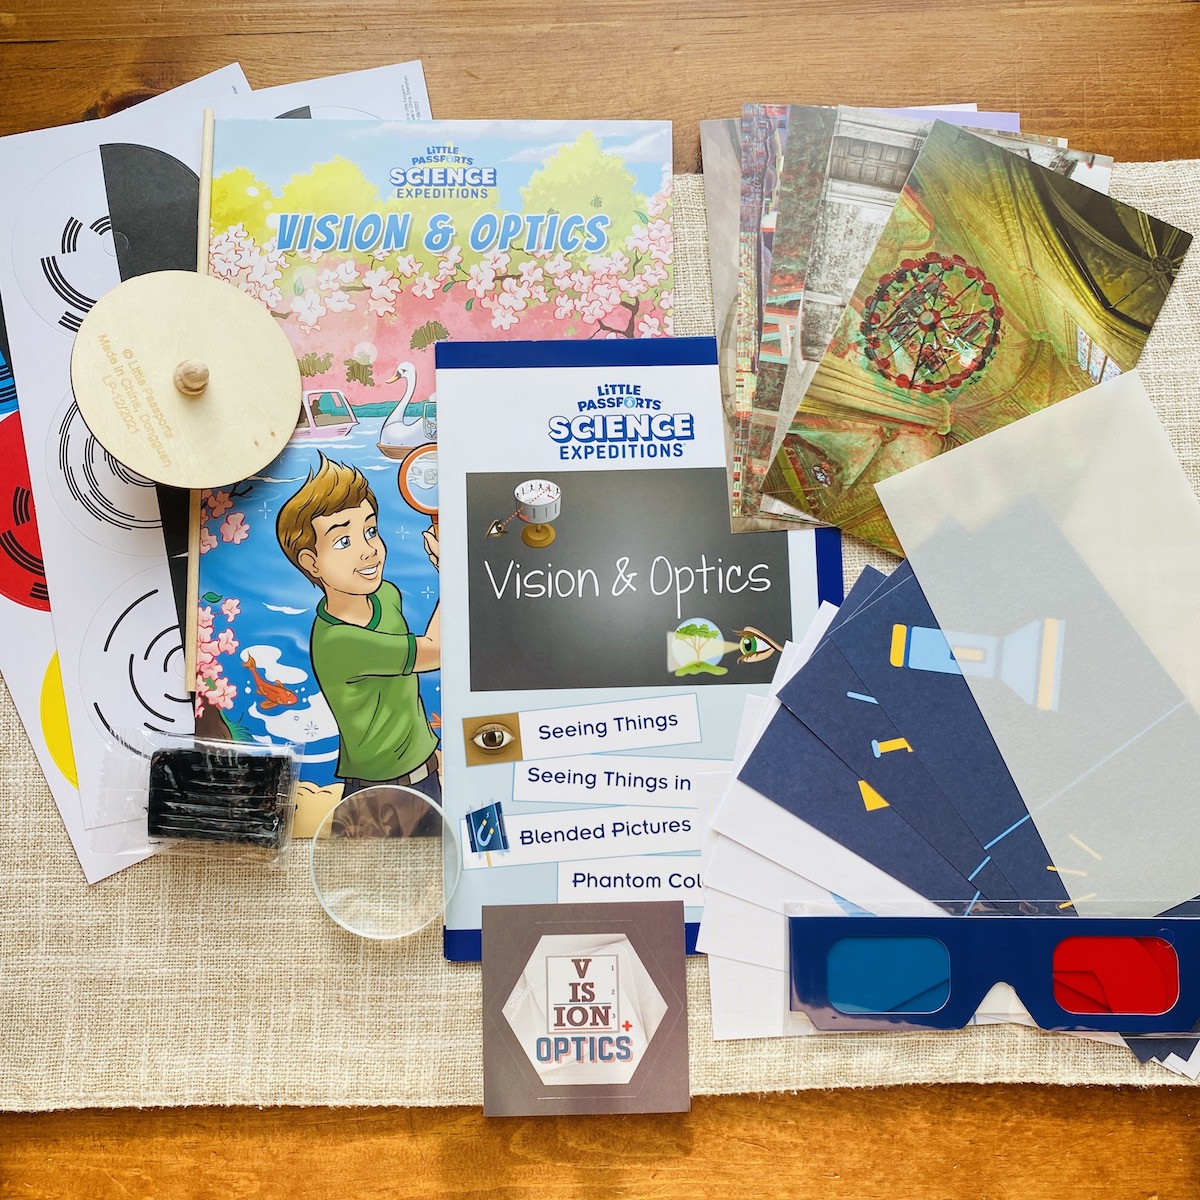 Little Passports Science Expeditions Review: “Vision & Optics”